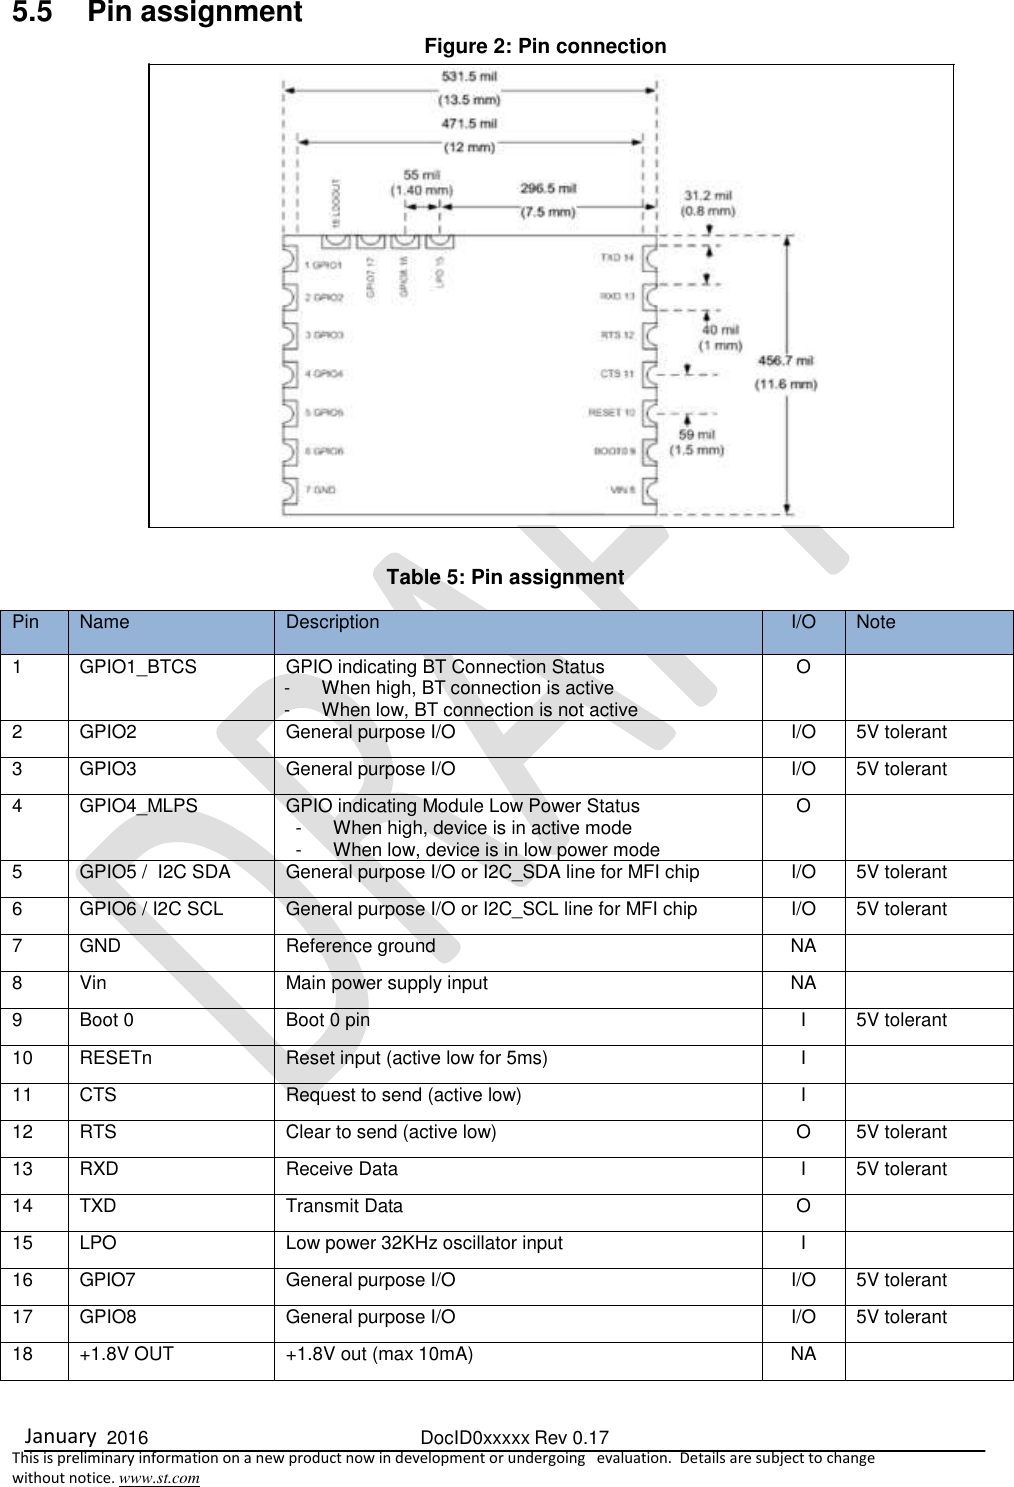  January  2016  DocID0xxxxx Rev 0.17   This is preliminary information on a new product now in development or undergoing   evaluation.  Details are subject to change  without notice. www.st.com  5.5  Pin assignment                                   Table 5: Pin assignment Pin Name Description I/O Note 1 GPIO1_BTCS GPIO indicating BT Connection Status -  When high, BT connection is active -  When low, BT connection is not active O  2 GPIO2 General purpose I/O I/O 5V tolerant 3 GPIO3 General purpose I/O I/O 5V tolerant 4 GPIO4_MLPS GPIO indicating Module Low Power Status -  When high, device is in active mode -  When low, device is in low power mode O  5 GPIO5 /  I2C SDA General purpose I/O or I2C_SDA line for MFI chip I/O 5V tolerant 6 GPIO6 / I2C SCL General purpose I/O or I2C_SCL line for MFI chip I/O 5V tolerant 7 GND Reference ground NA  8 Vin Main power supply input  NA  9 Boot 0 Boot 0 pin I 5V tolerant 10 RESETn Reset input (active low for 5ms) I  11 CTS Request to send (active low) I  12 RTS Clear to send (active low) O 5V tolerant 13 RXD Receive Data I 5V tolerant 14 TXD Transmit Data O  15 LPO Low power 32KHz oscillator input I  16 GPIO7 General purpose I/O I/O 5V tolerant 17 GPIO8 General purpose I/O I/O 5V tolerant 18 +1.8V OUT +1.8V out (max 10mA) NA     Figure 2: Pin connection 